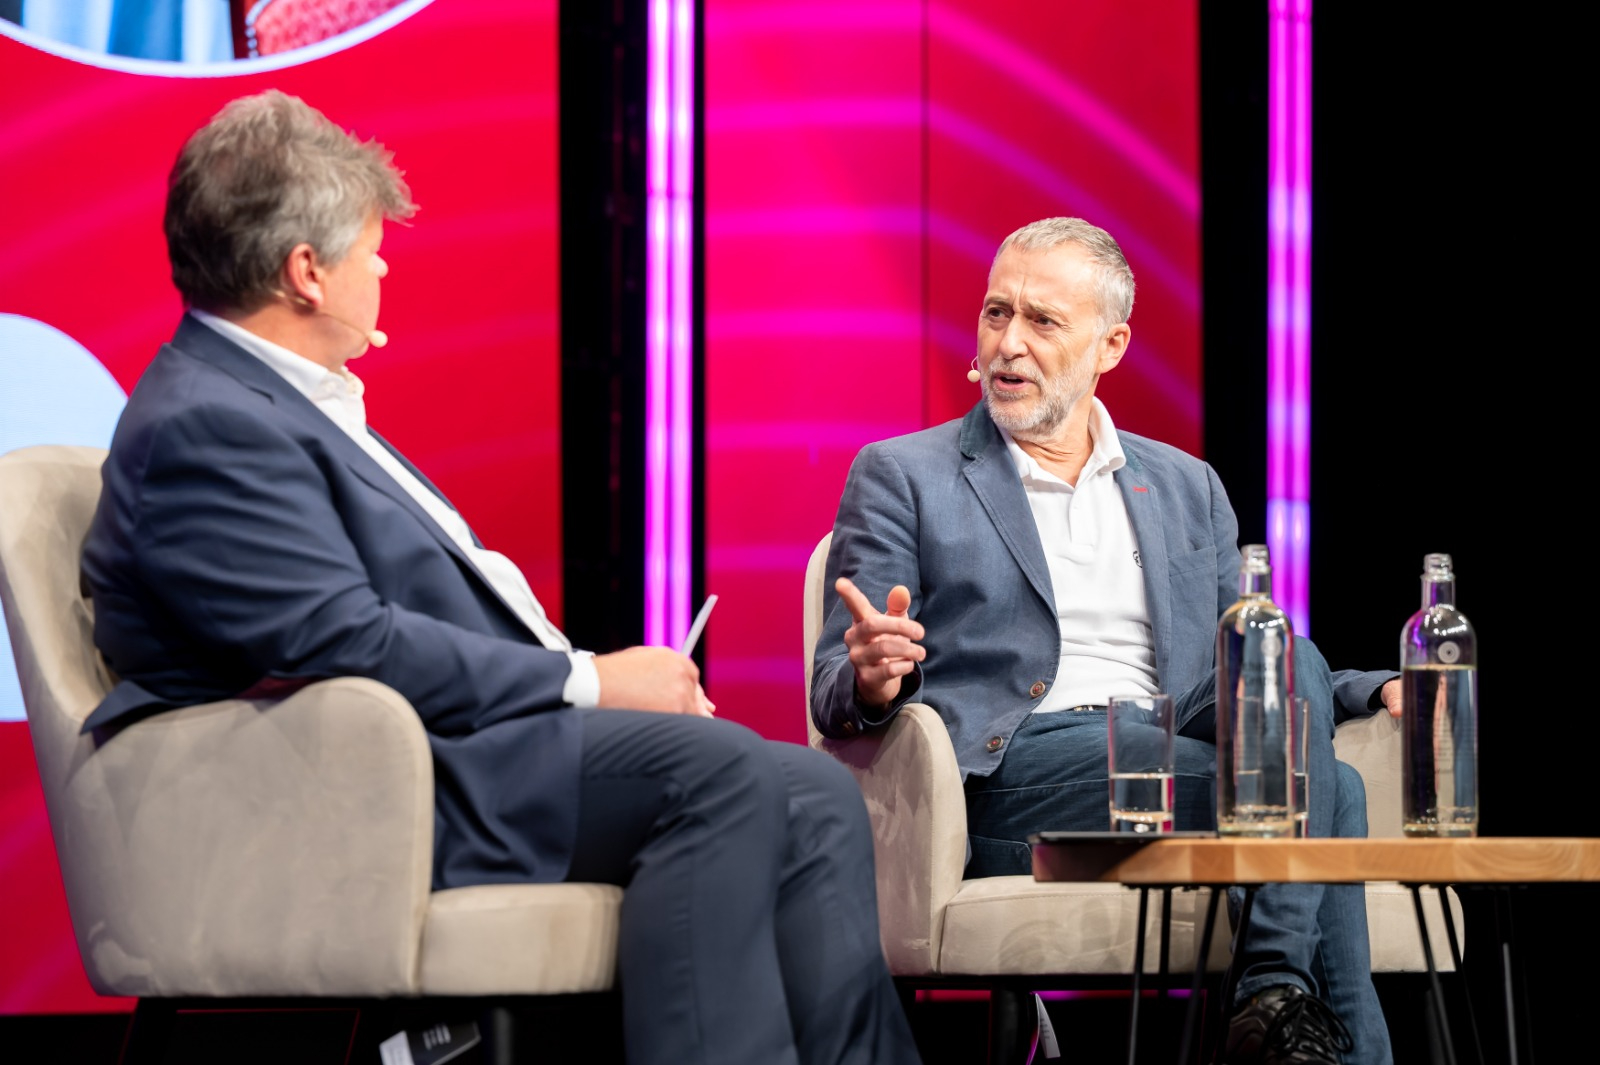 Michel Roux Jr in conversation with Jonathan Langston